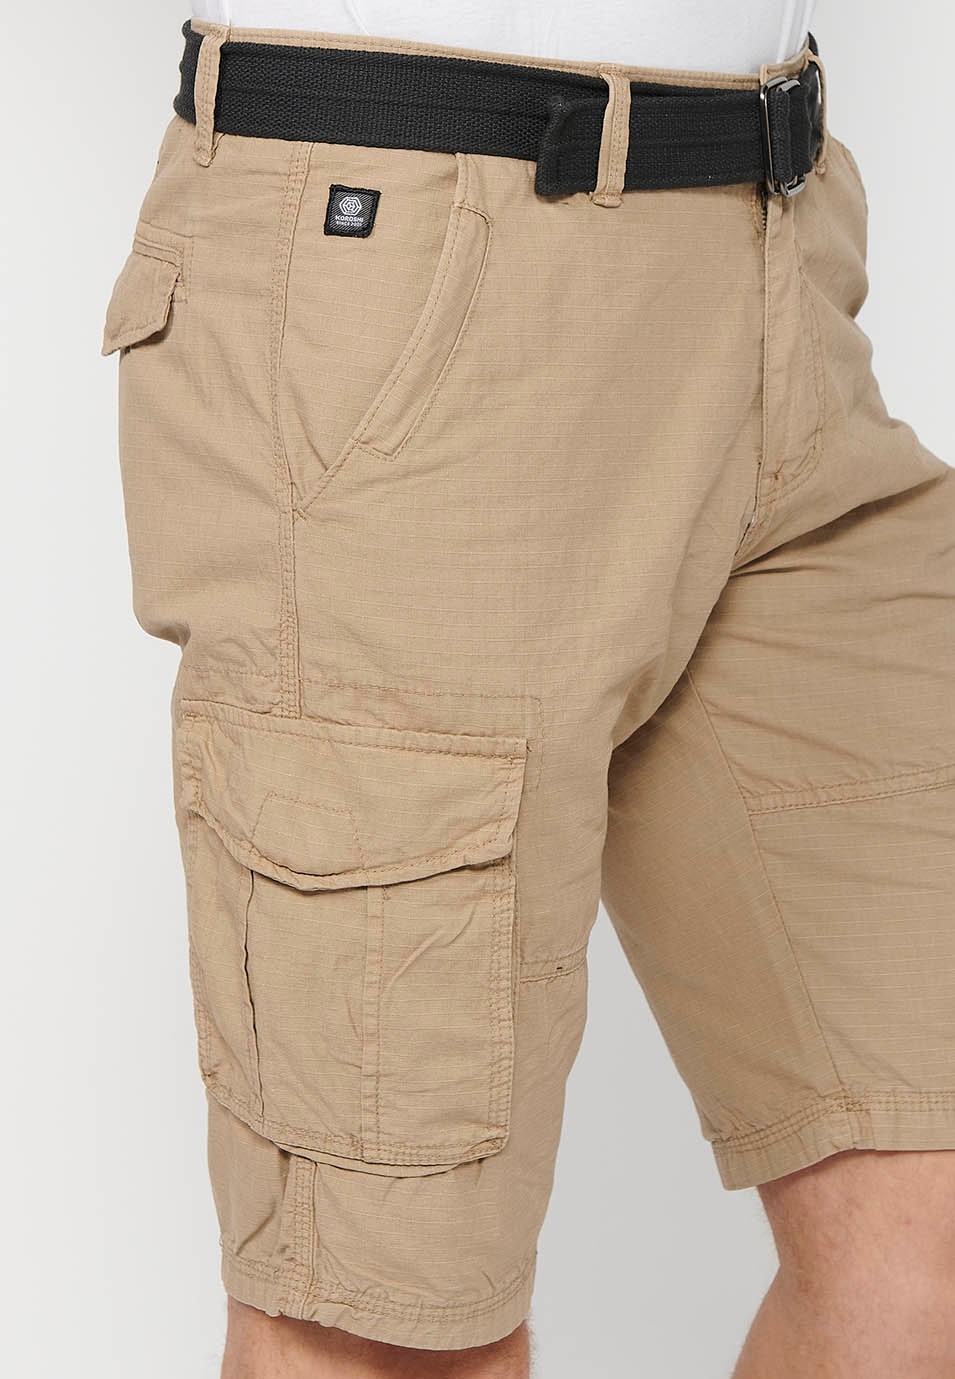 Cotton cargo shorts with belt and front closure with zipper and button with pockets, two back pockets with flap and two cargo pants in Beige Color for Men 7